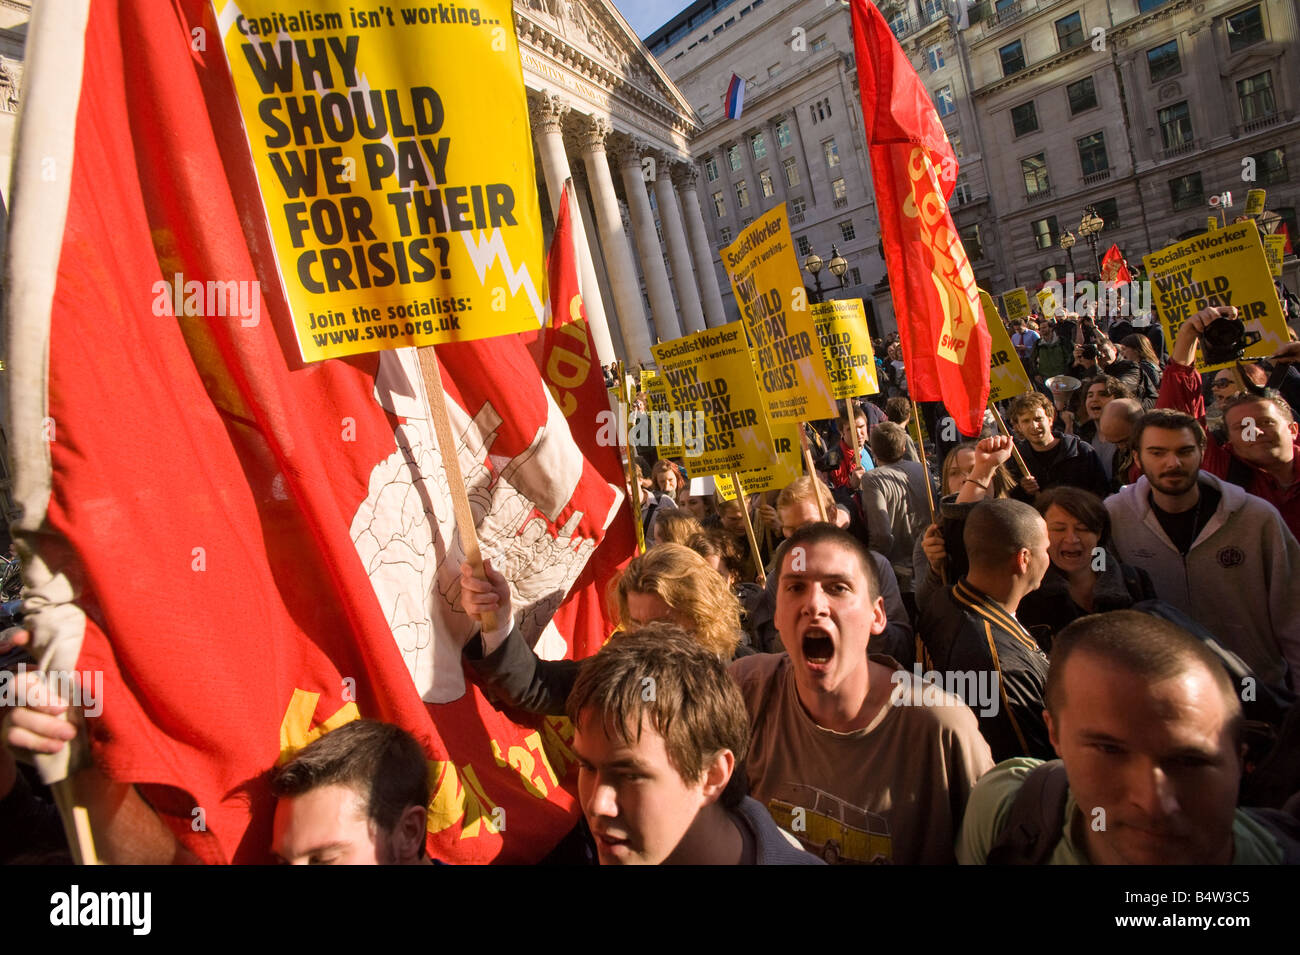 Socialist Workers Party demonstrating in the City of London against government bailing out banks Oct 2008 London United Kingdom Stock Photo